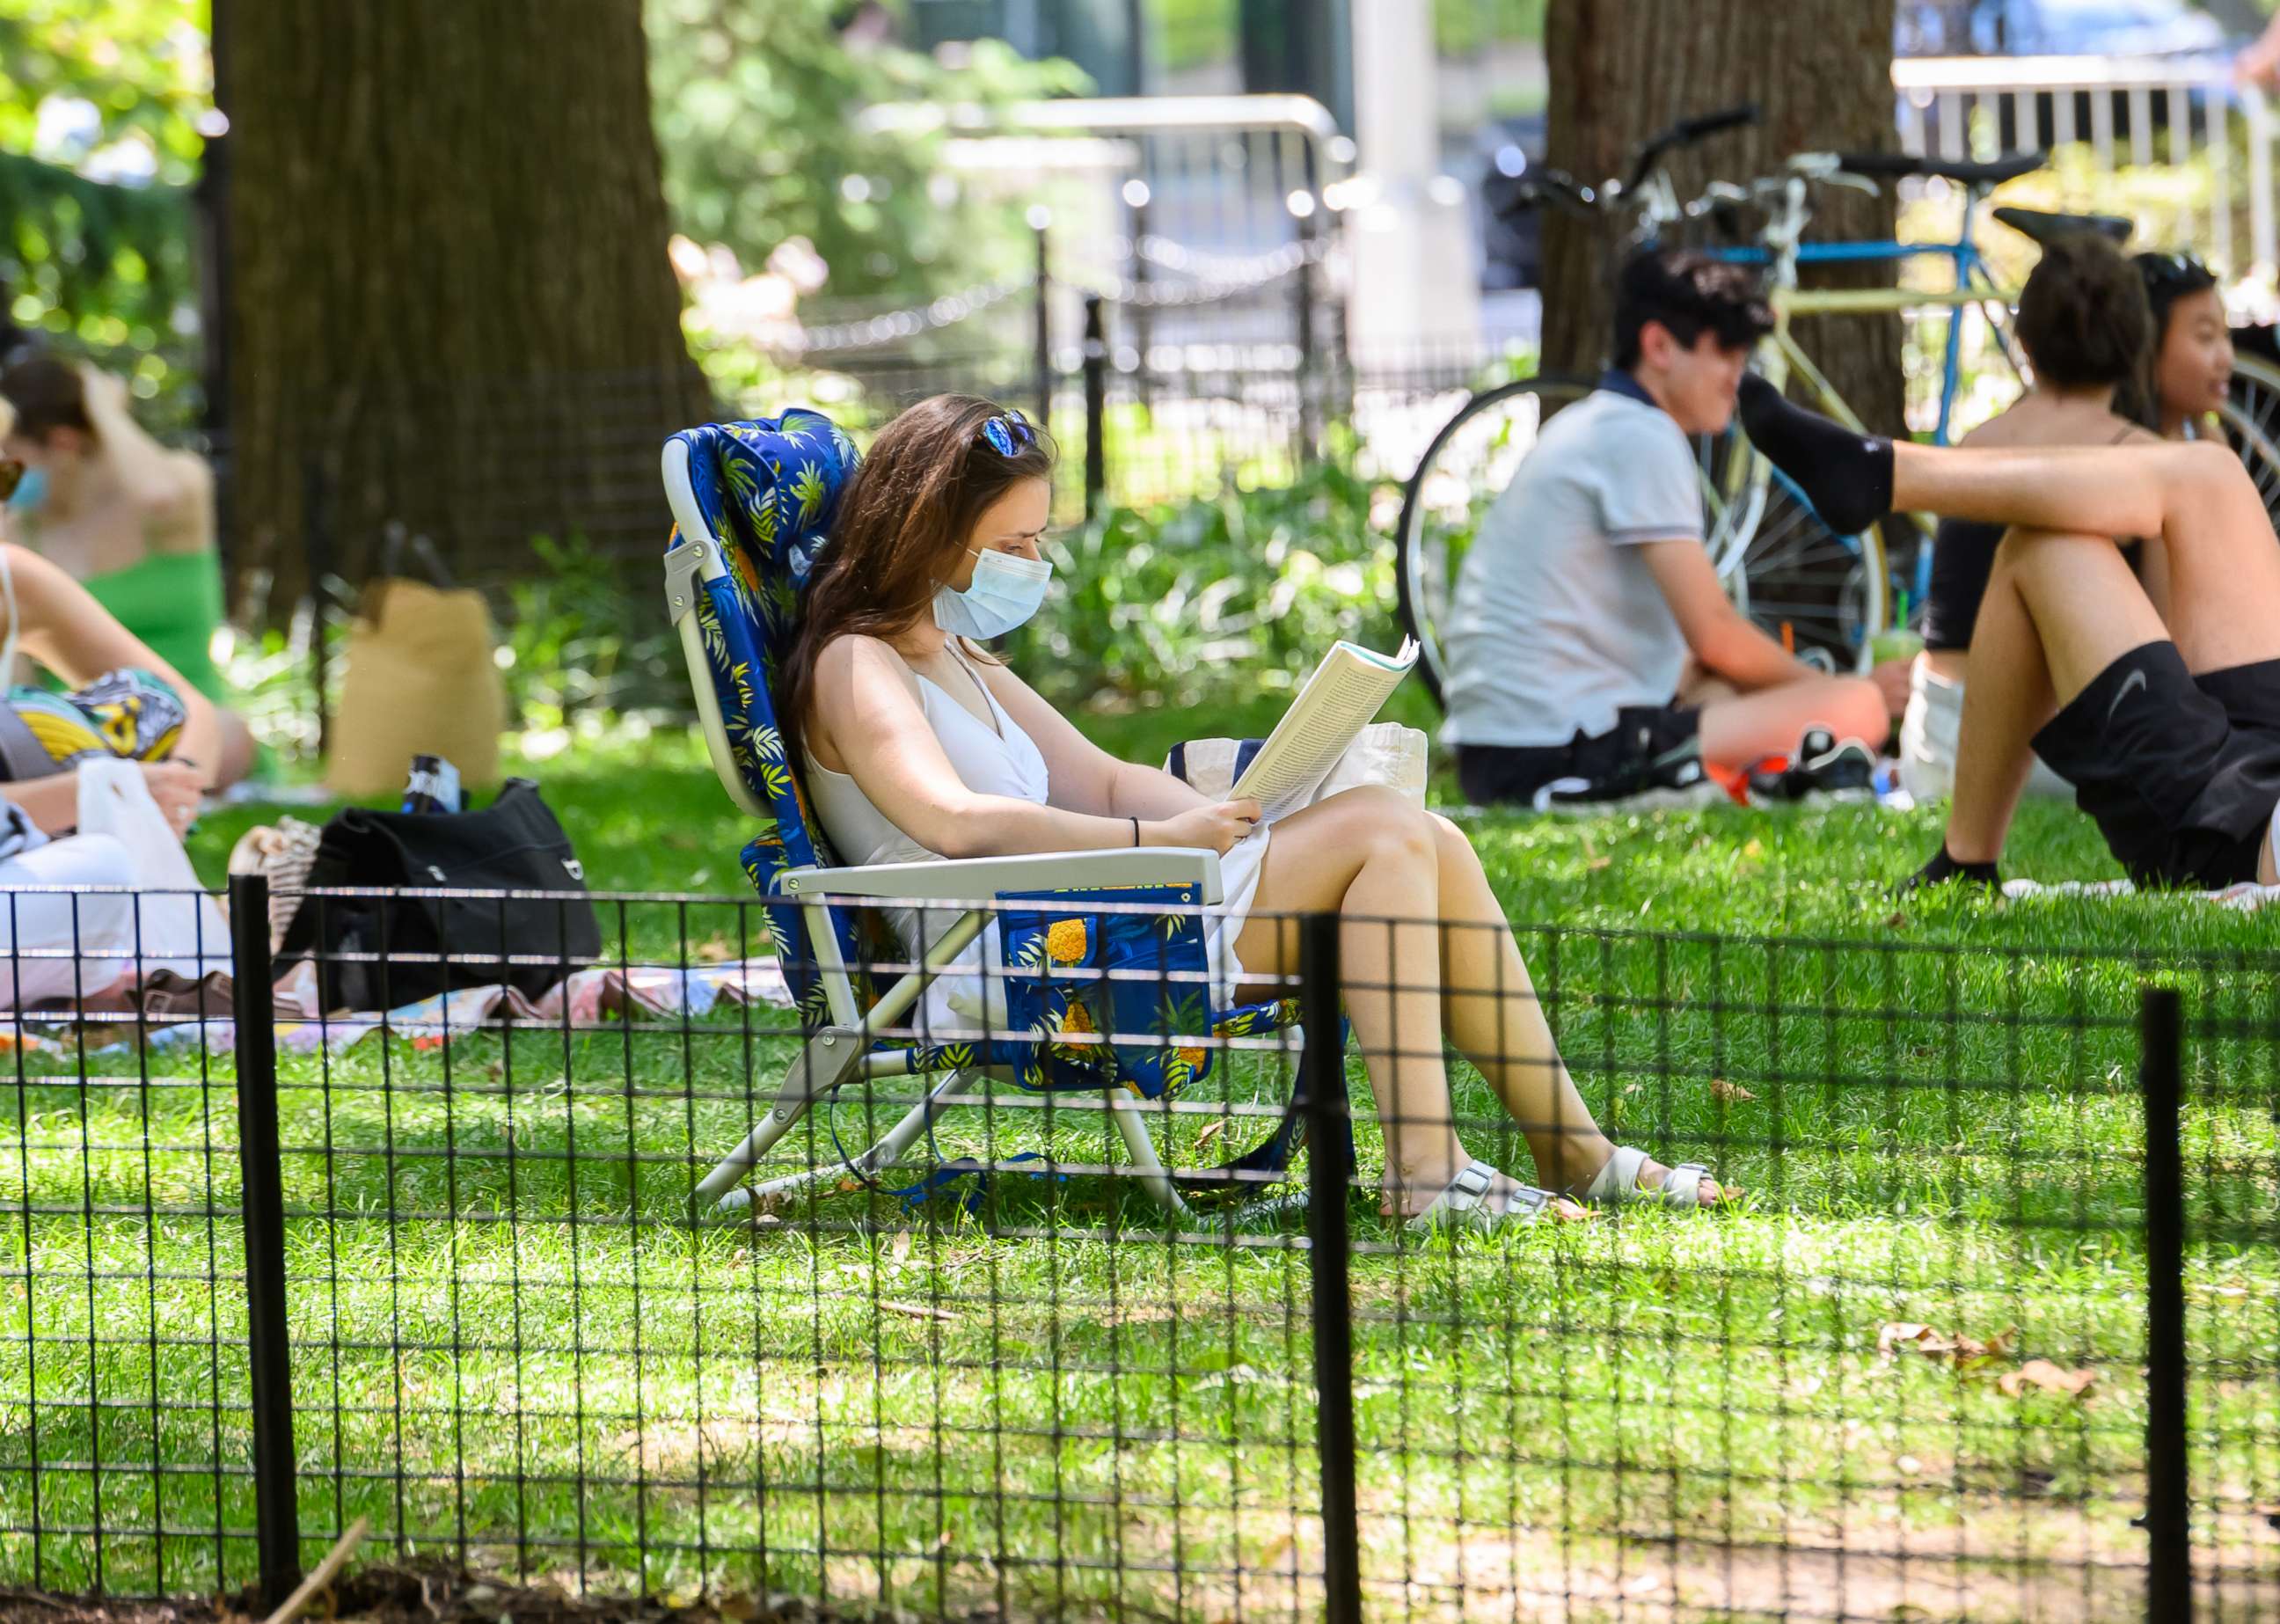 PHOTO: A person wears a protective face mask while reading a book in Washington Square Park as New York City moves into Phase 3 of re-opening following restrictions imposed to curb the coronavirus pandemic on July 12, 2020.